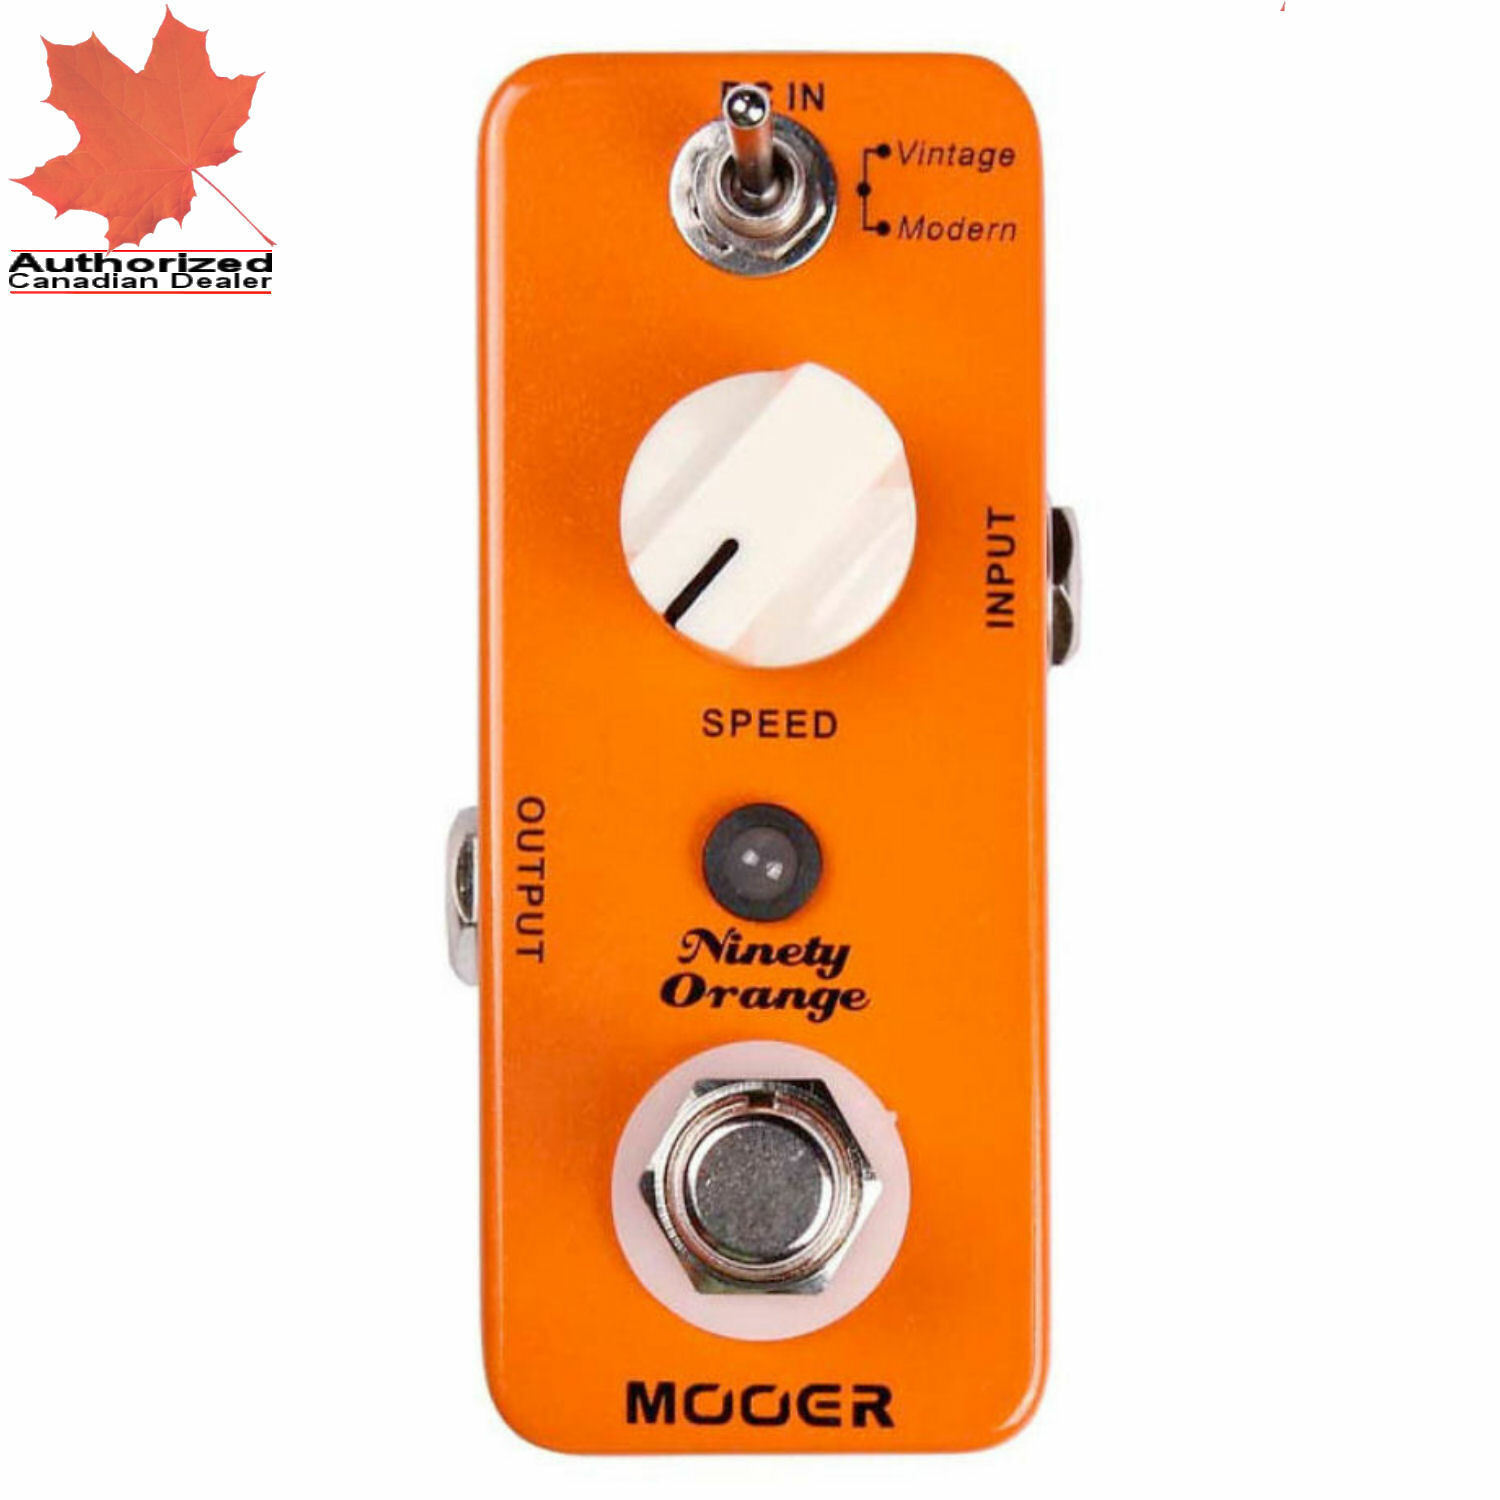 Mooer Ninety Orange Phaser Micro Guitar Effects Pedal True Bypass New - $47.64